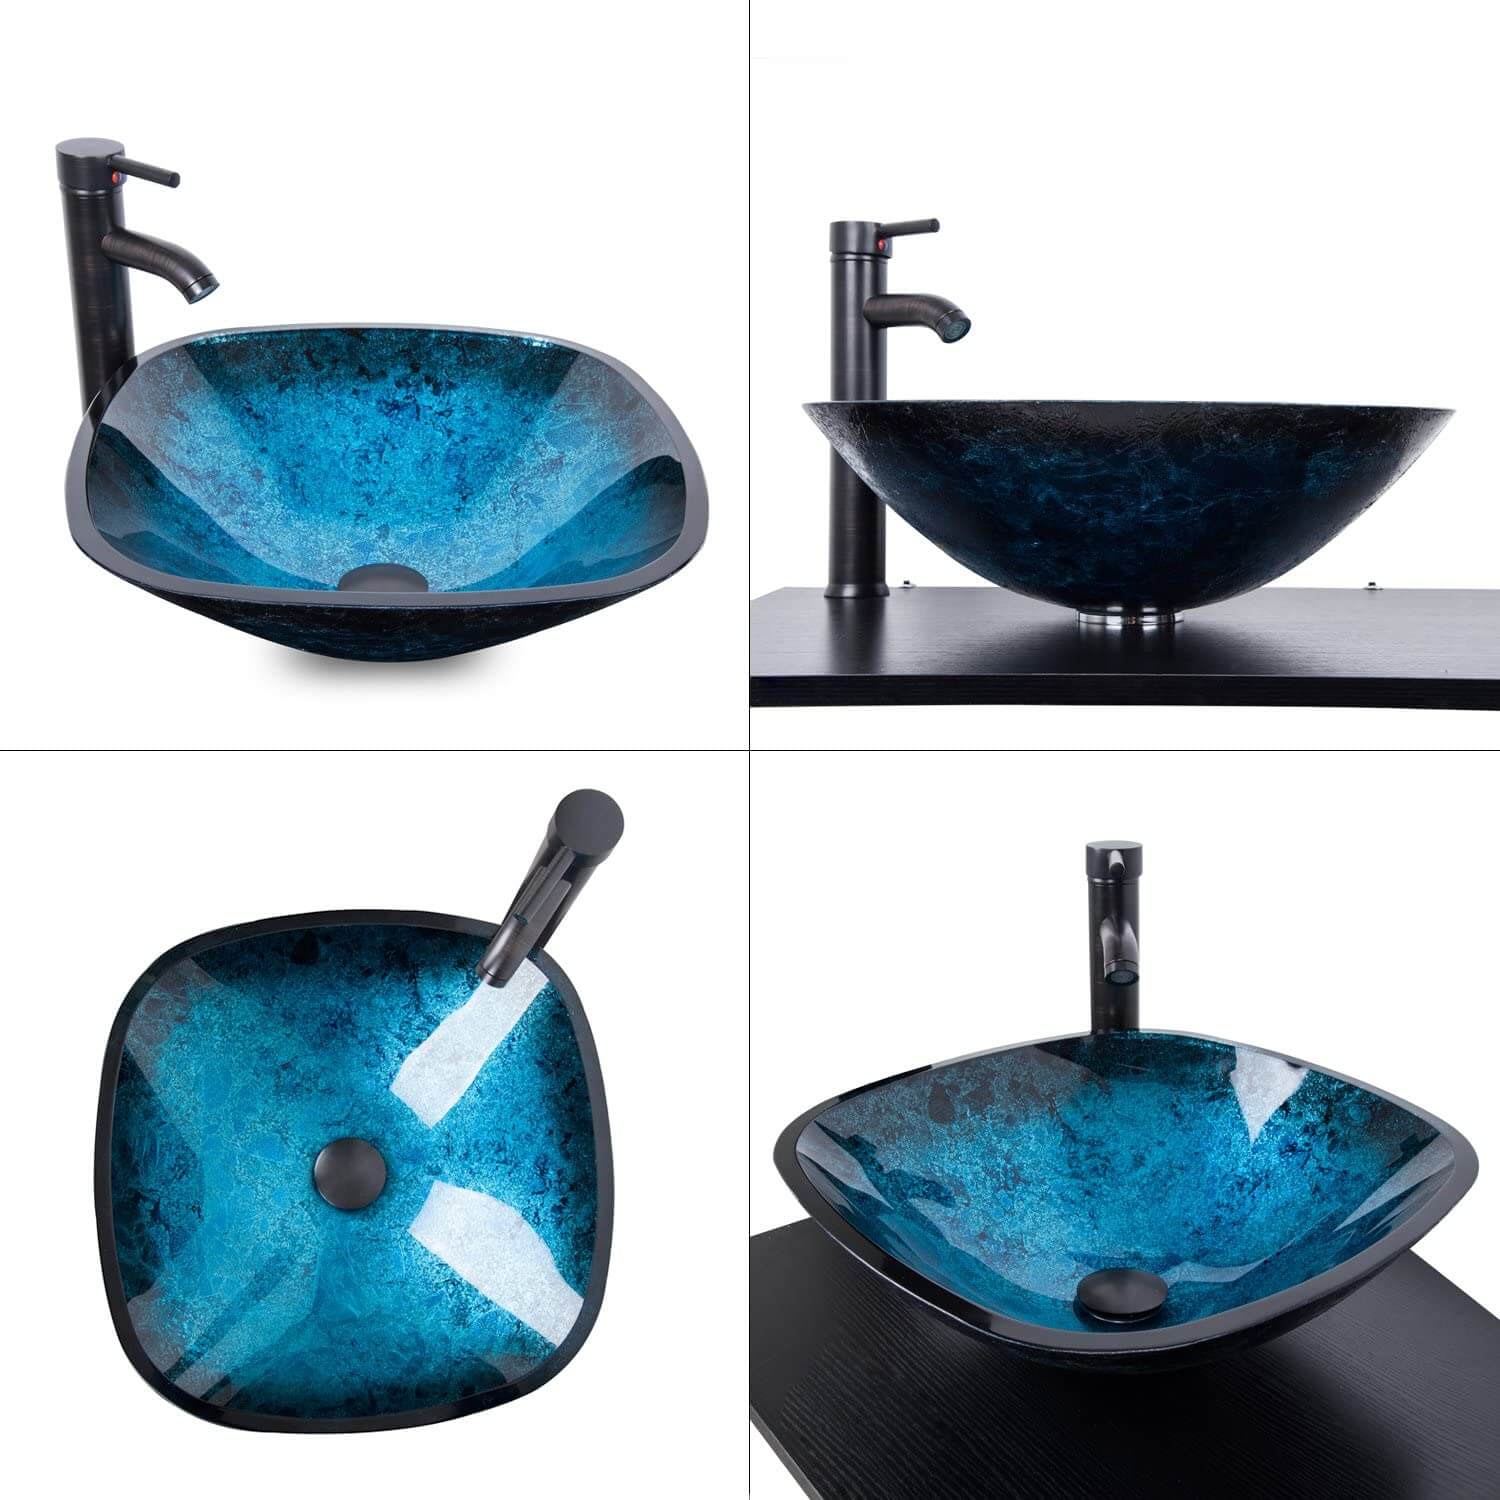 4 angles of Elecwish blue square sink